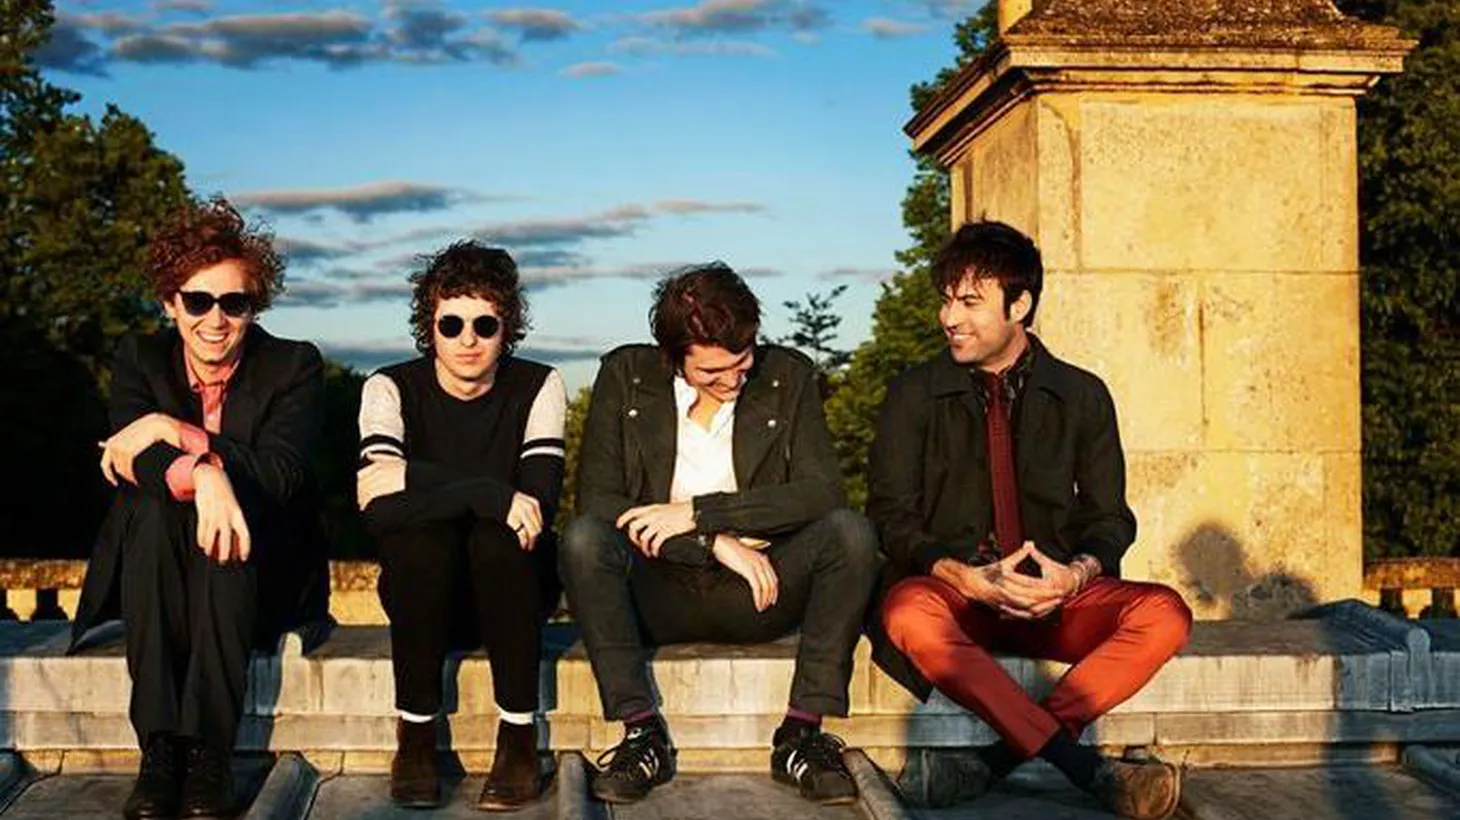 UK pop band The Kooks have an irresistible charm. They've had us hooked since their early releases and their new tunes are just as compelling...